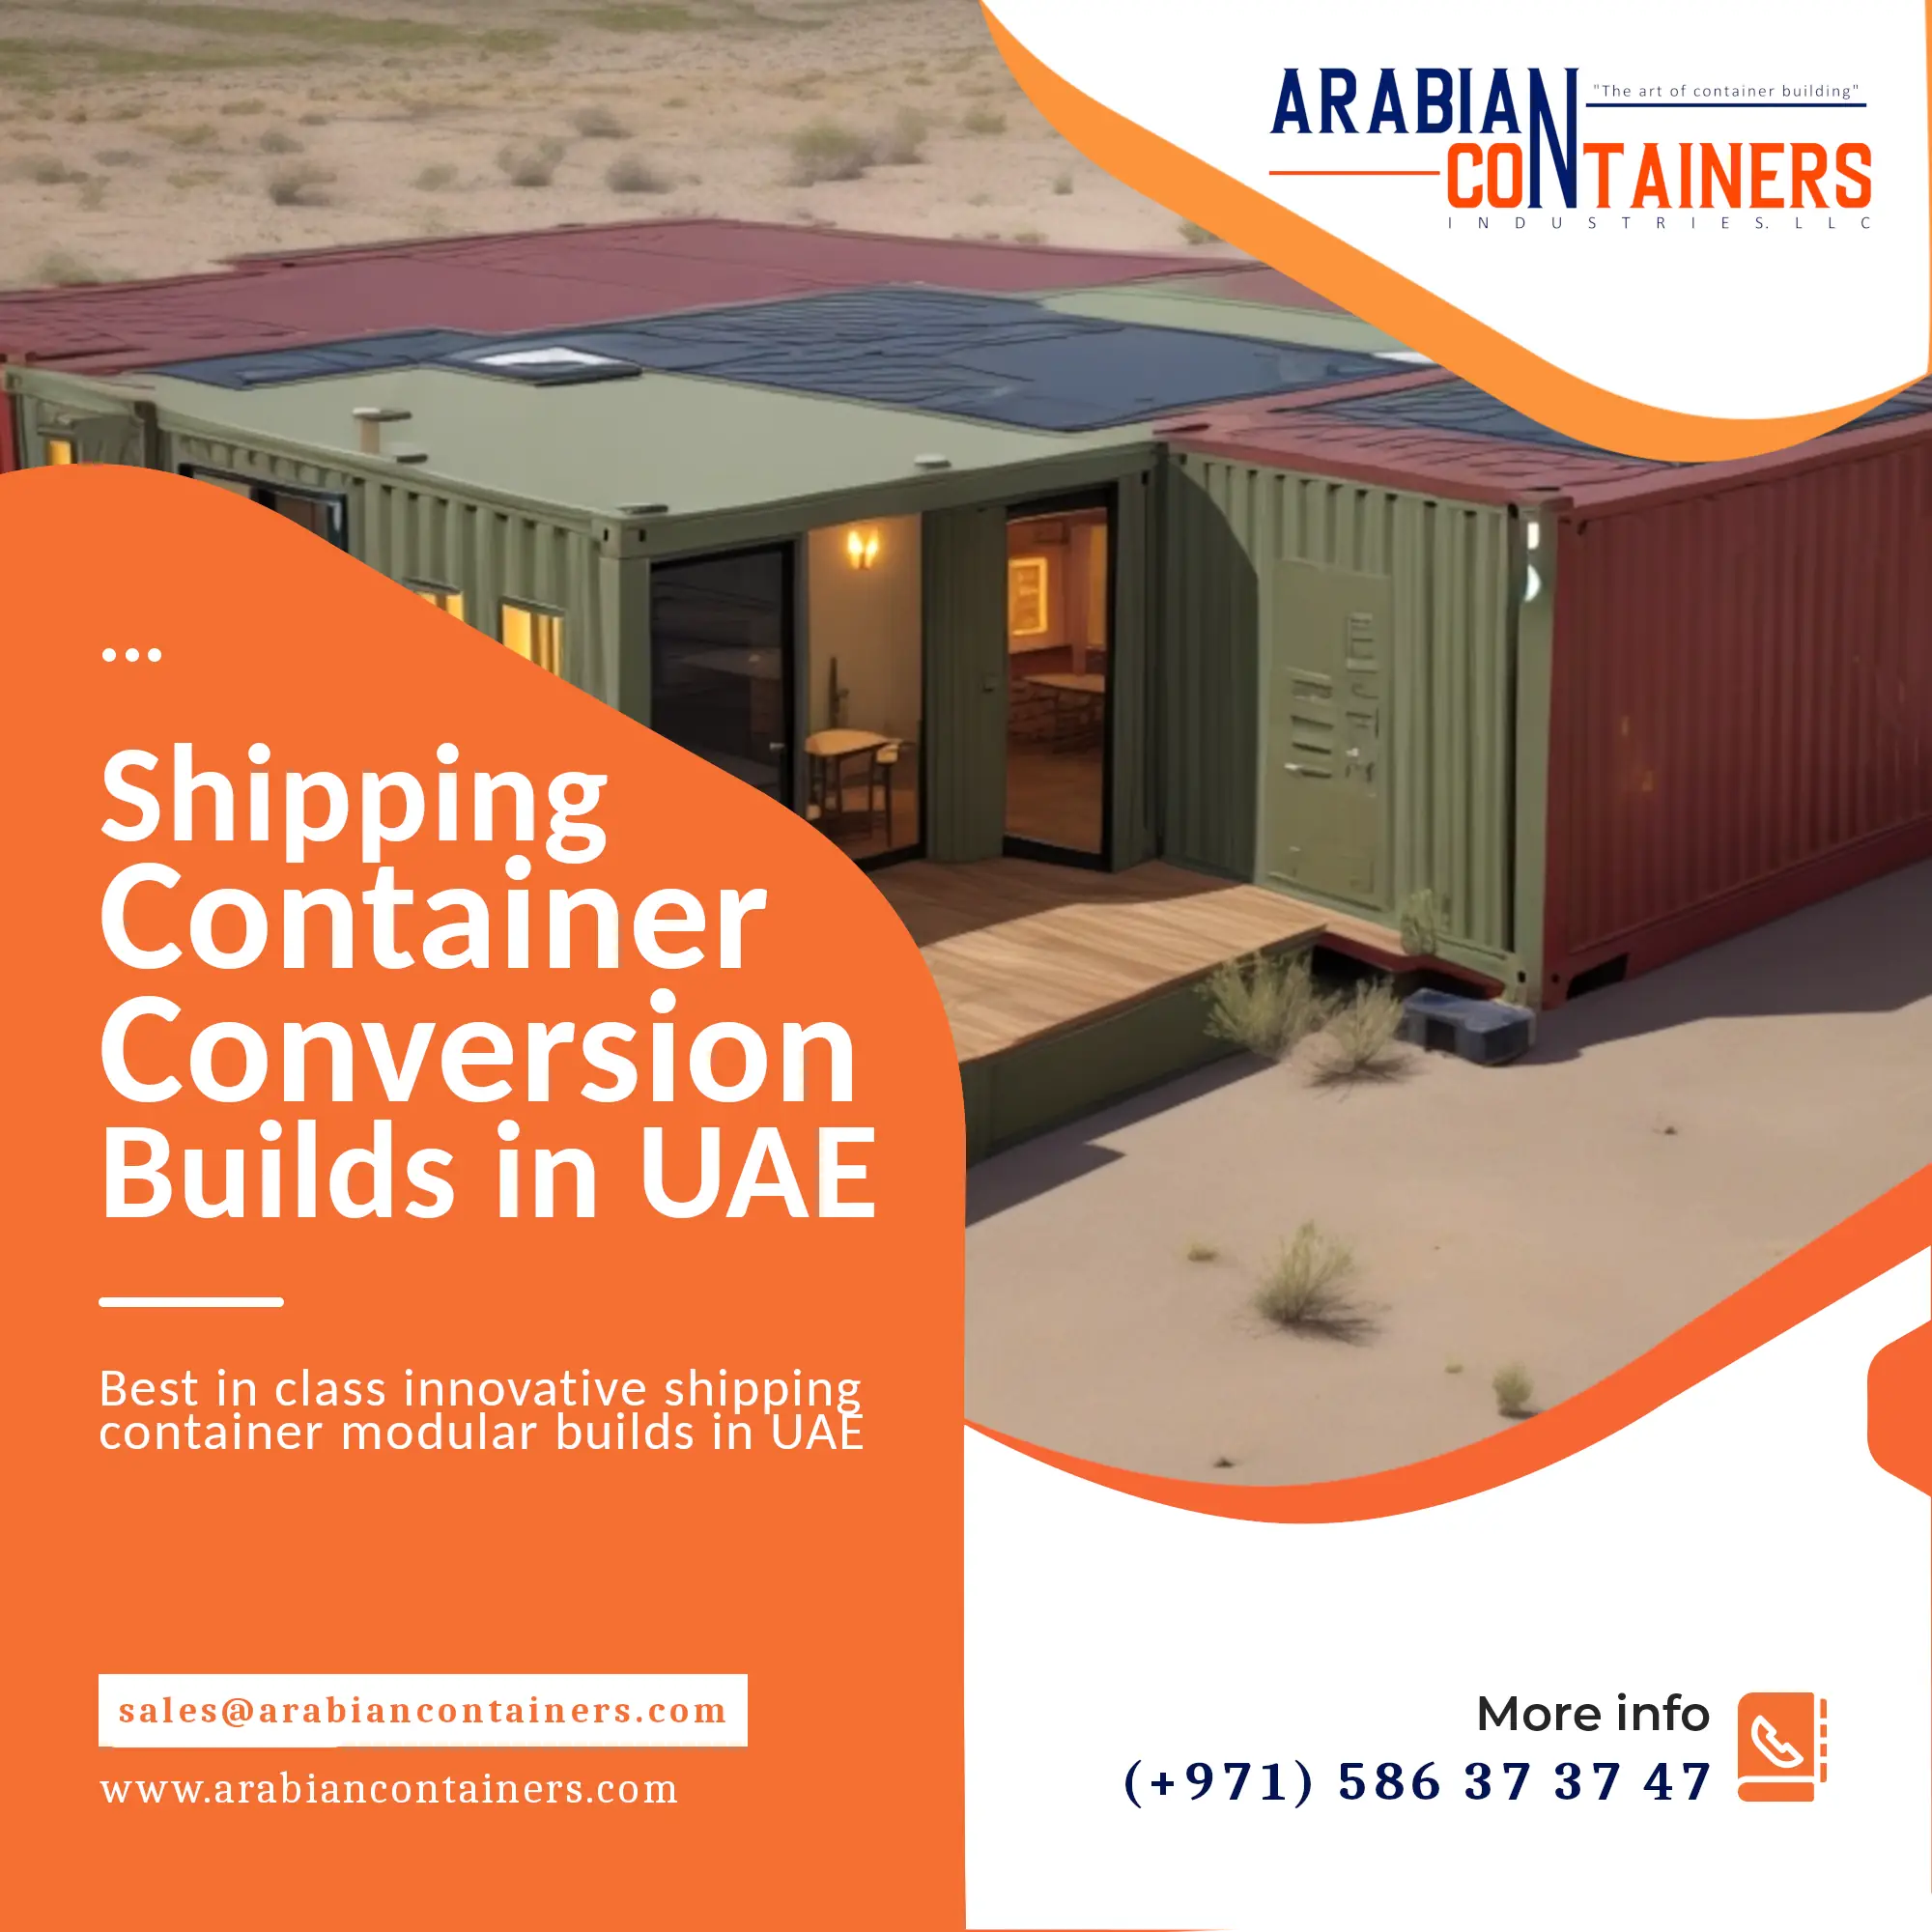 Shipping container buildings construction company in UAE.